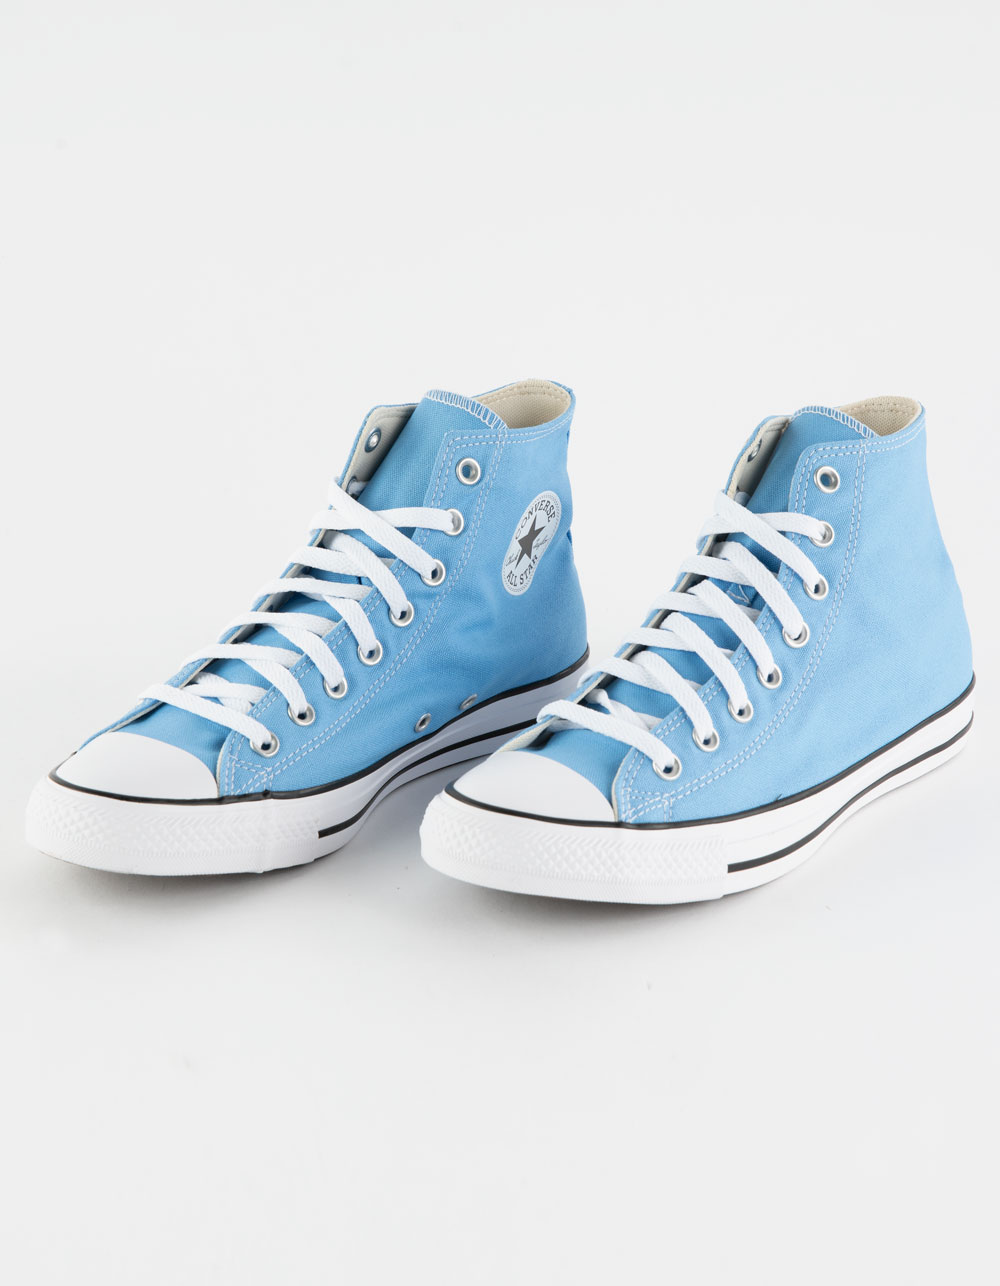 Converse Chuck Taylor All Star High Top Unisex Shoes.